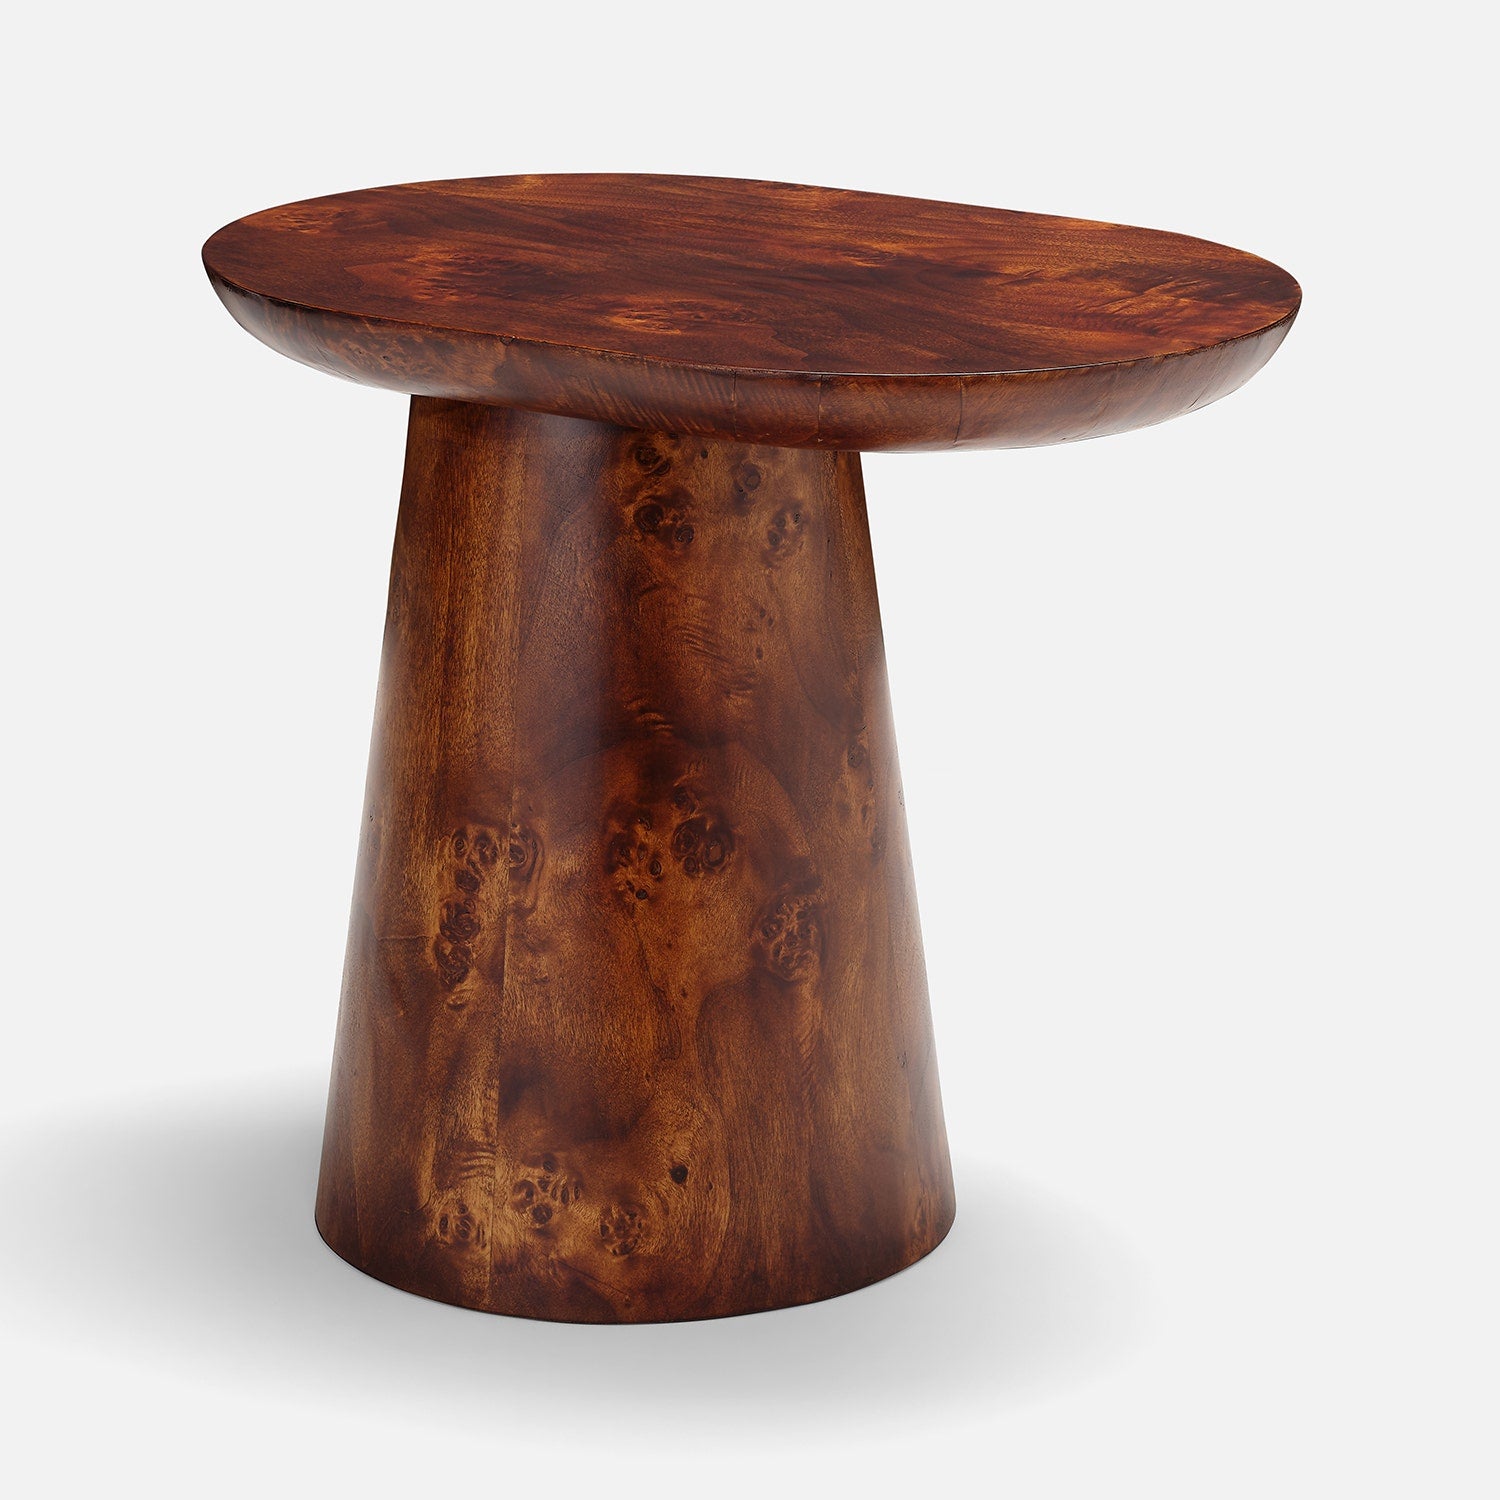 Made Goods Romulus Swirling Grain Leg Tapered Coffee Table